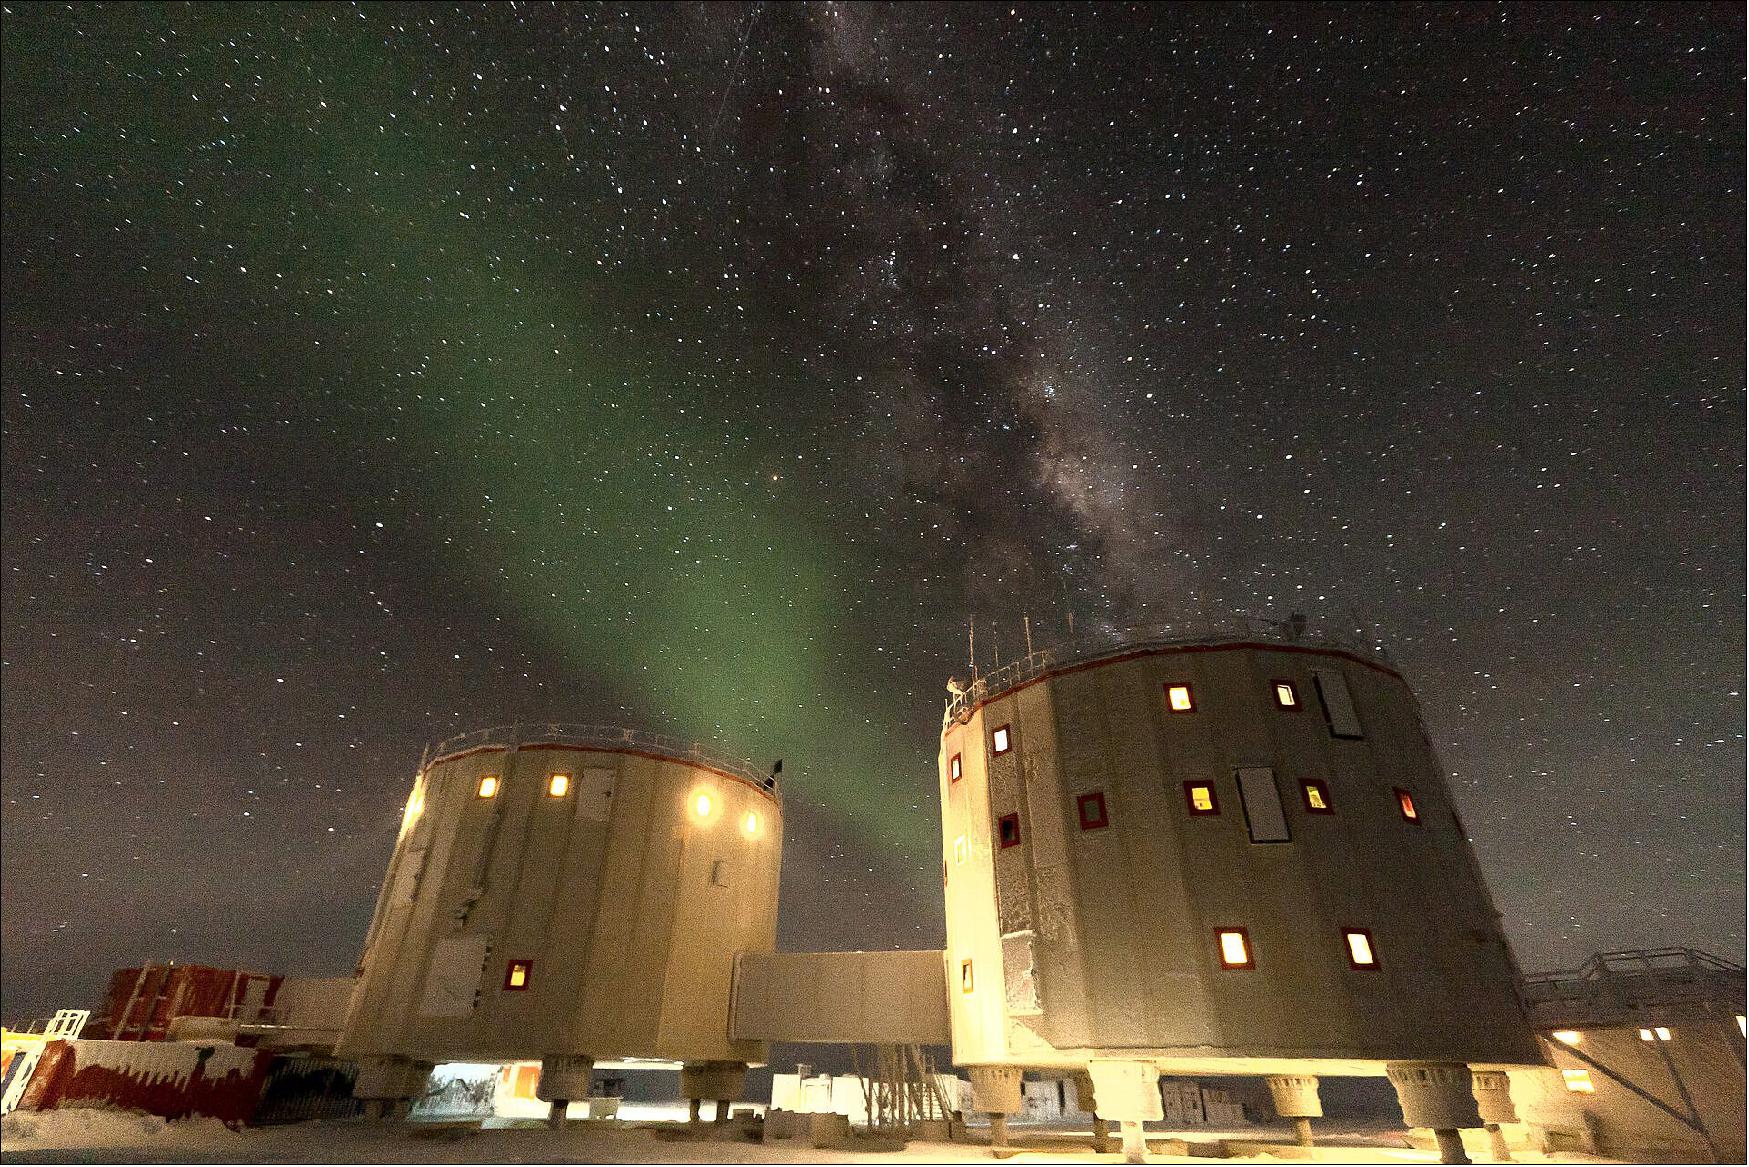 Figure 18: Aurora Australis over Concordia base. The ethereal green glow of Aurora Australis high over Concordia located in the Antarctic at –75ºS latitude.